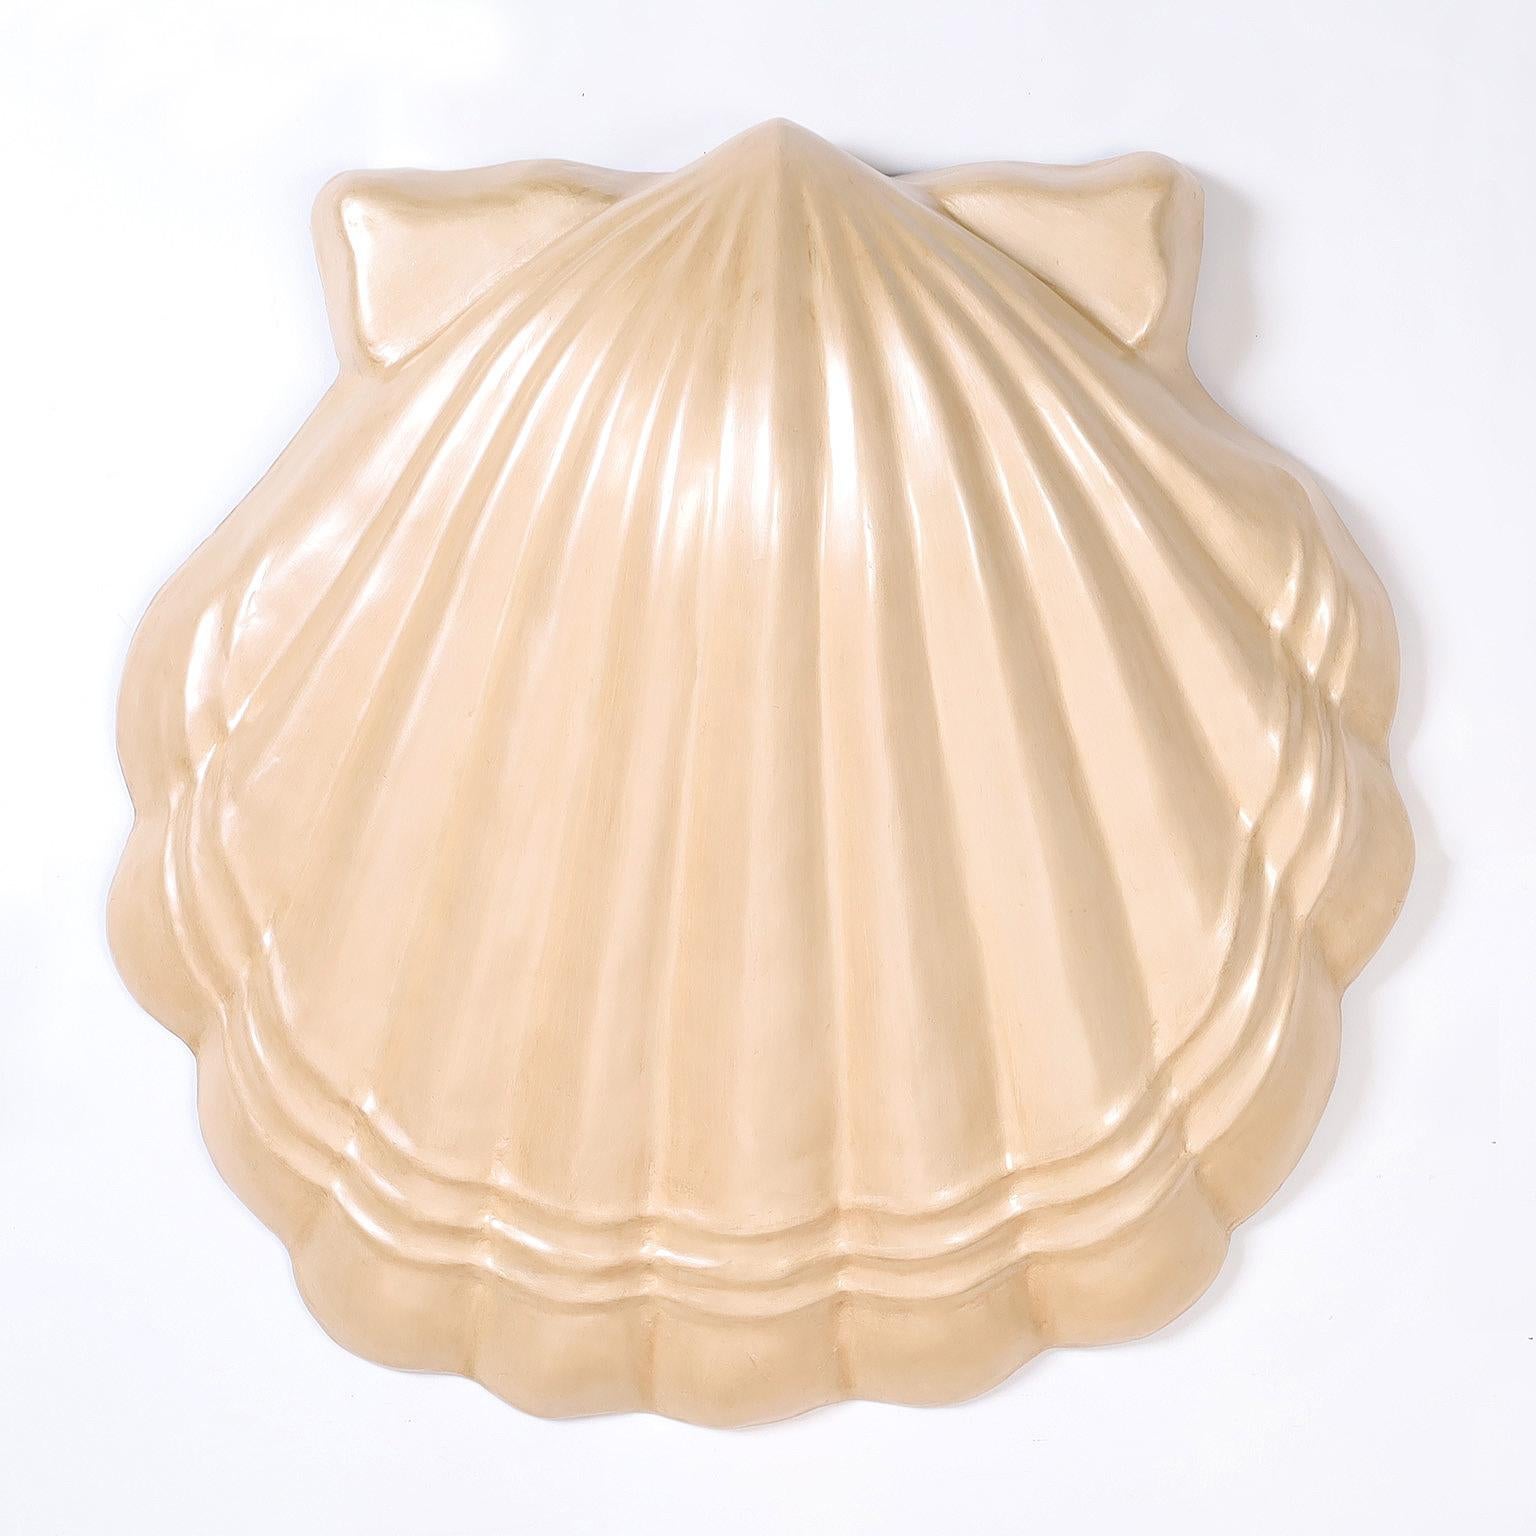 Large mid century seashell wall sculpture crafted in fiberglass in its iconic form with a pearlized lacquered finish.